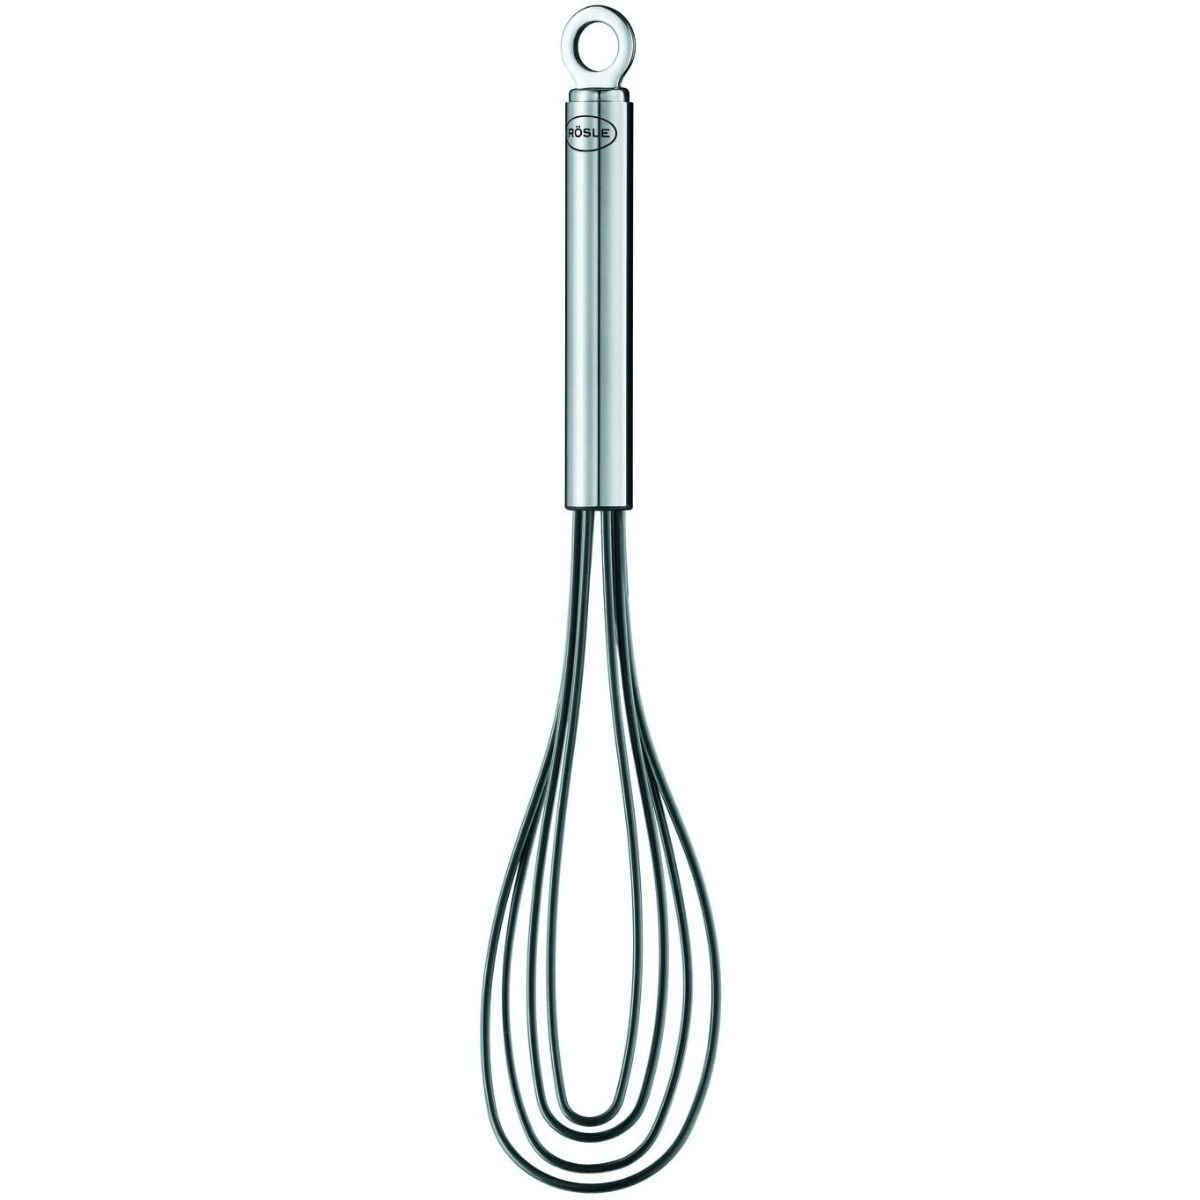 Silicone Whisk 10 Flat